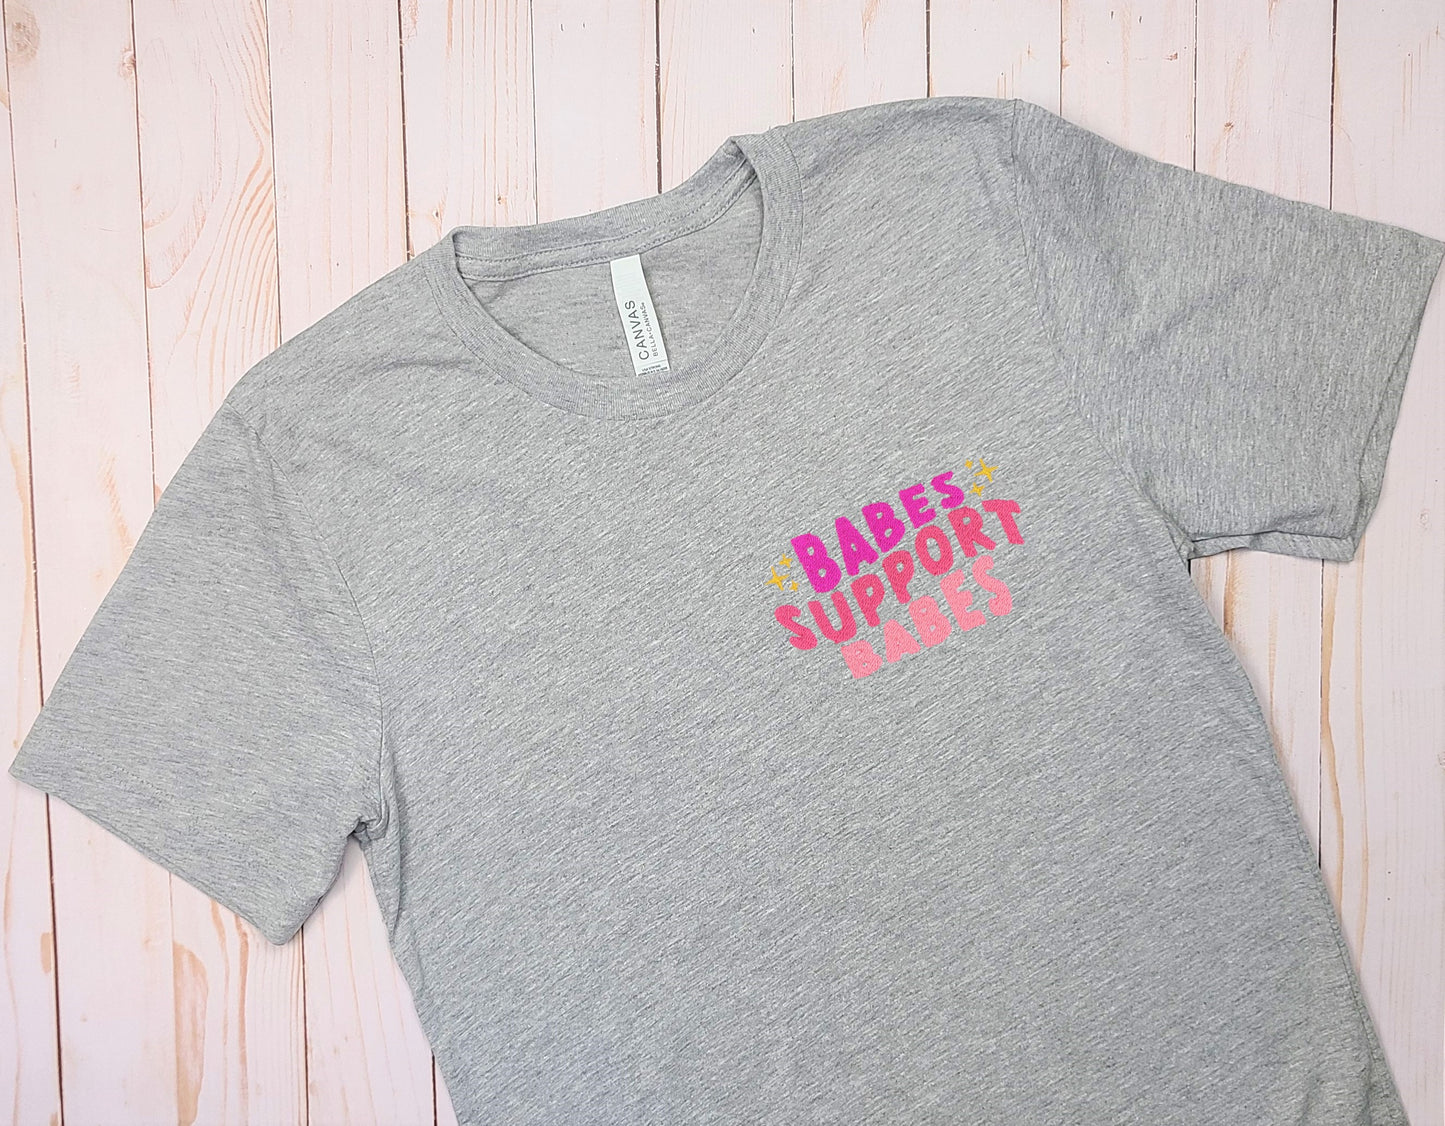 Babes Support Babes Embroidered Gray Tee